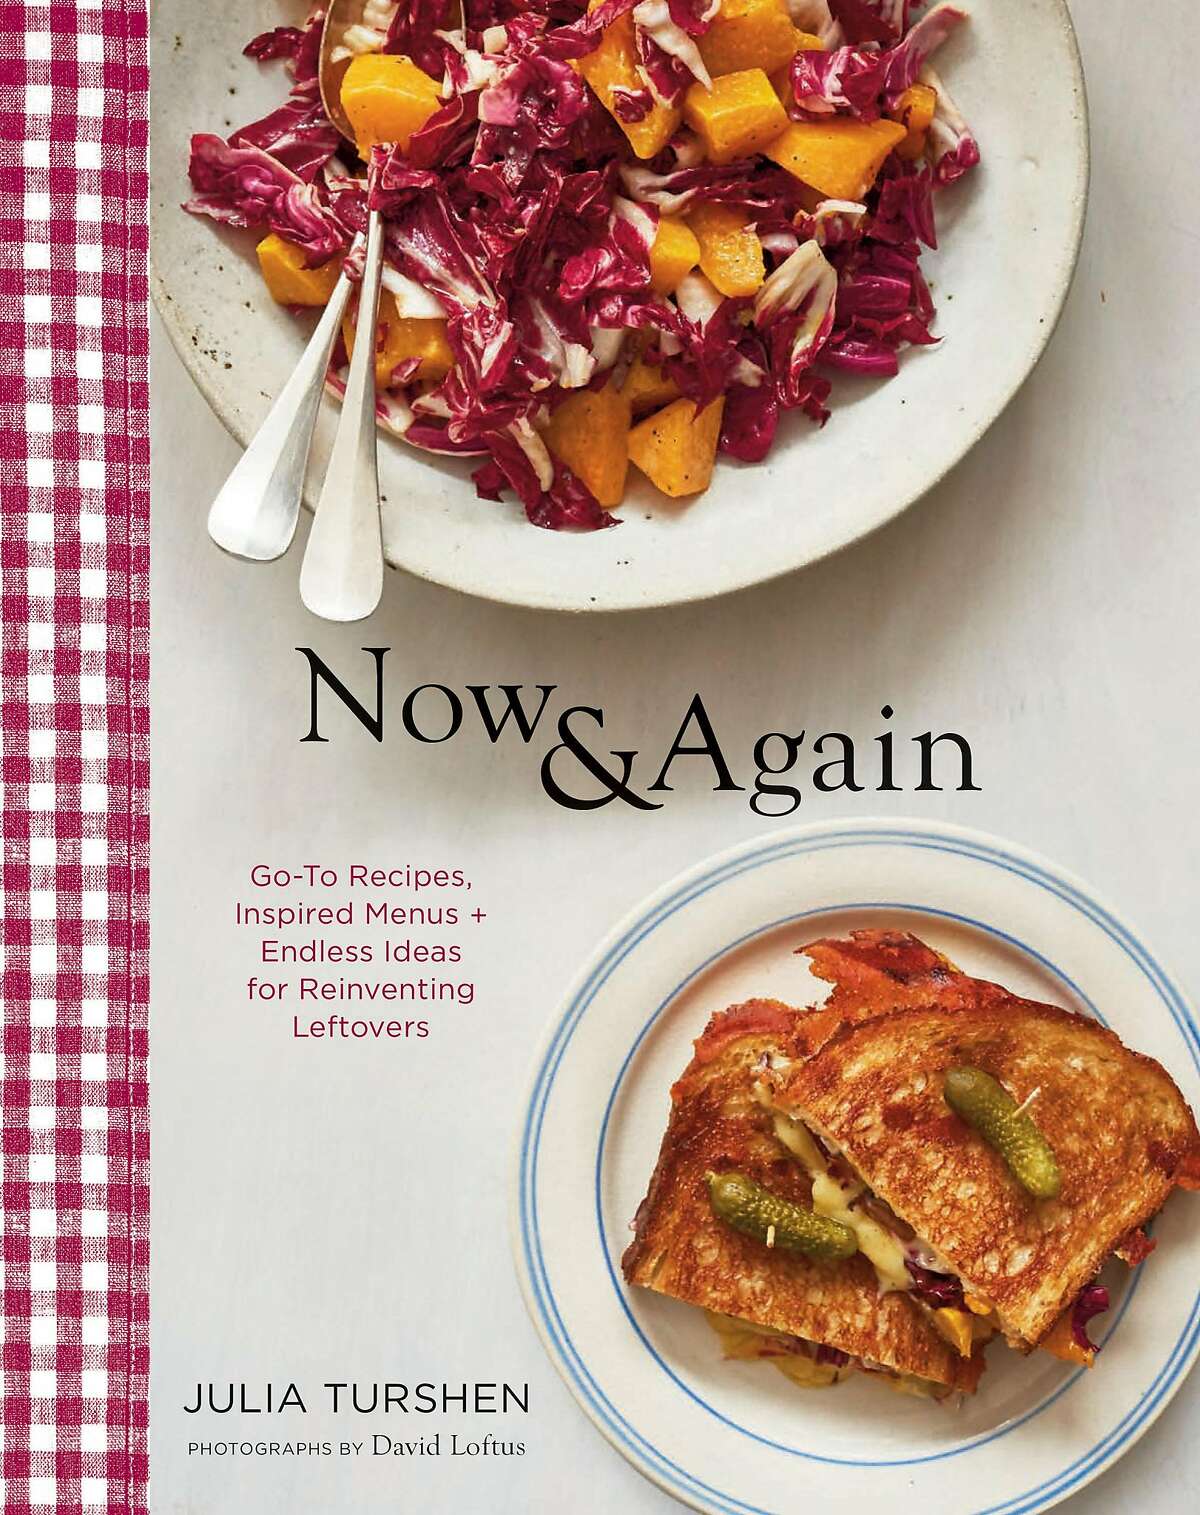 "Now & Again: Go-To Recipes, Inspired Menus + Endless Ideas for Reinventing Leftovers," by Julia Turshen (Chronicle Books; $35)